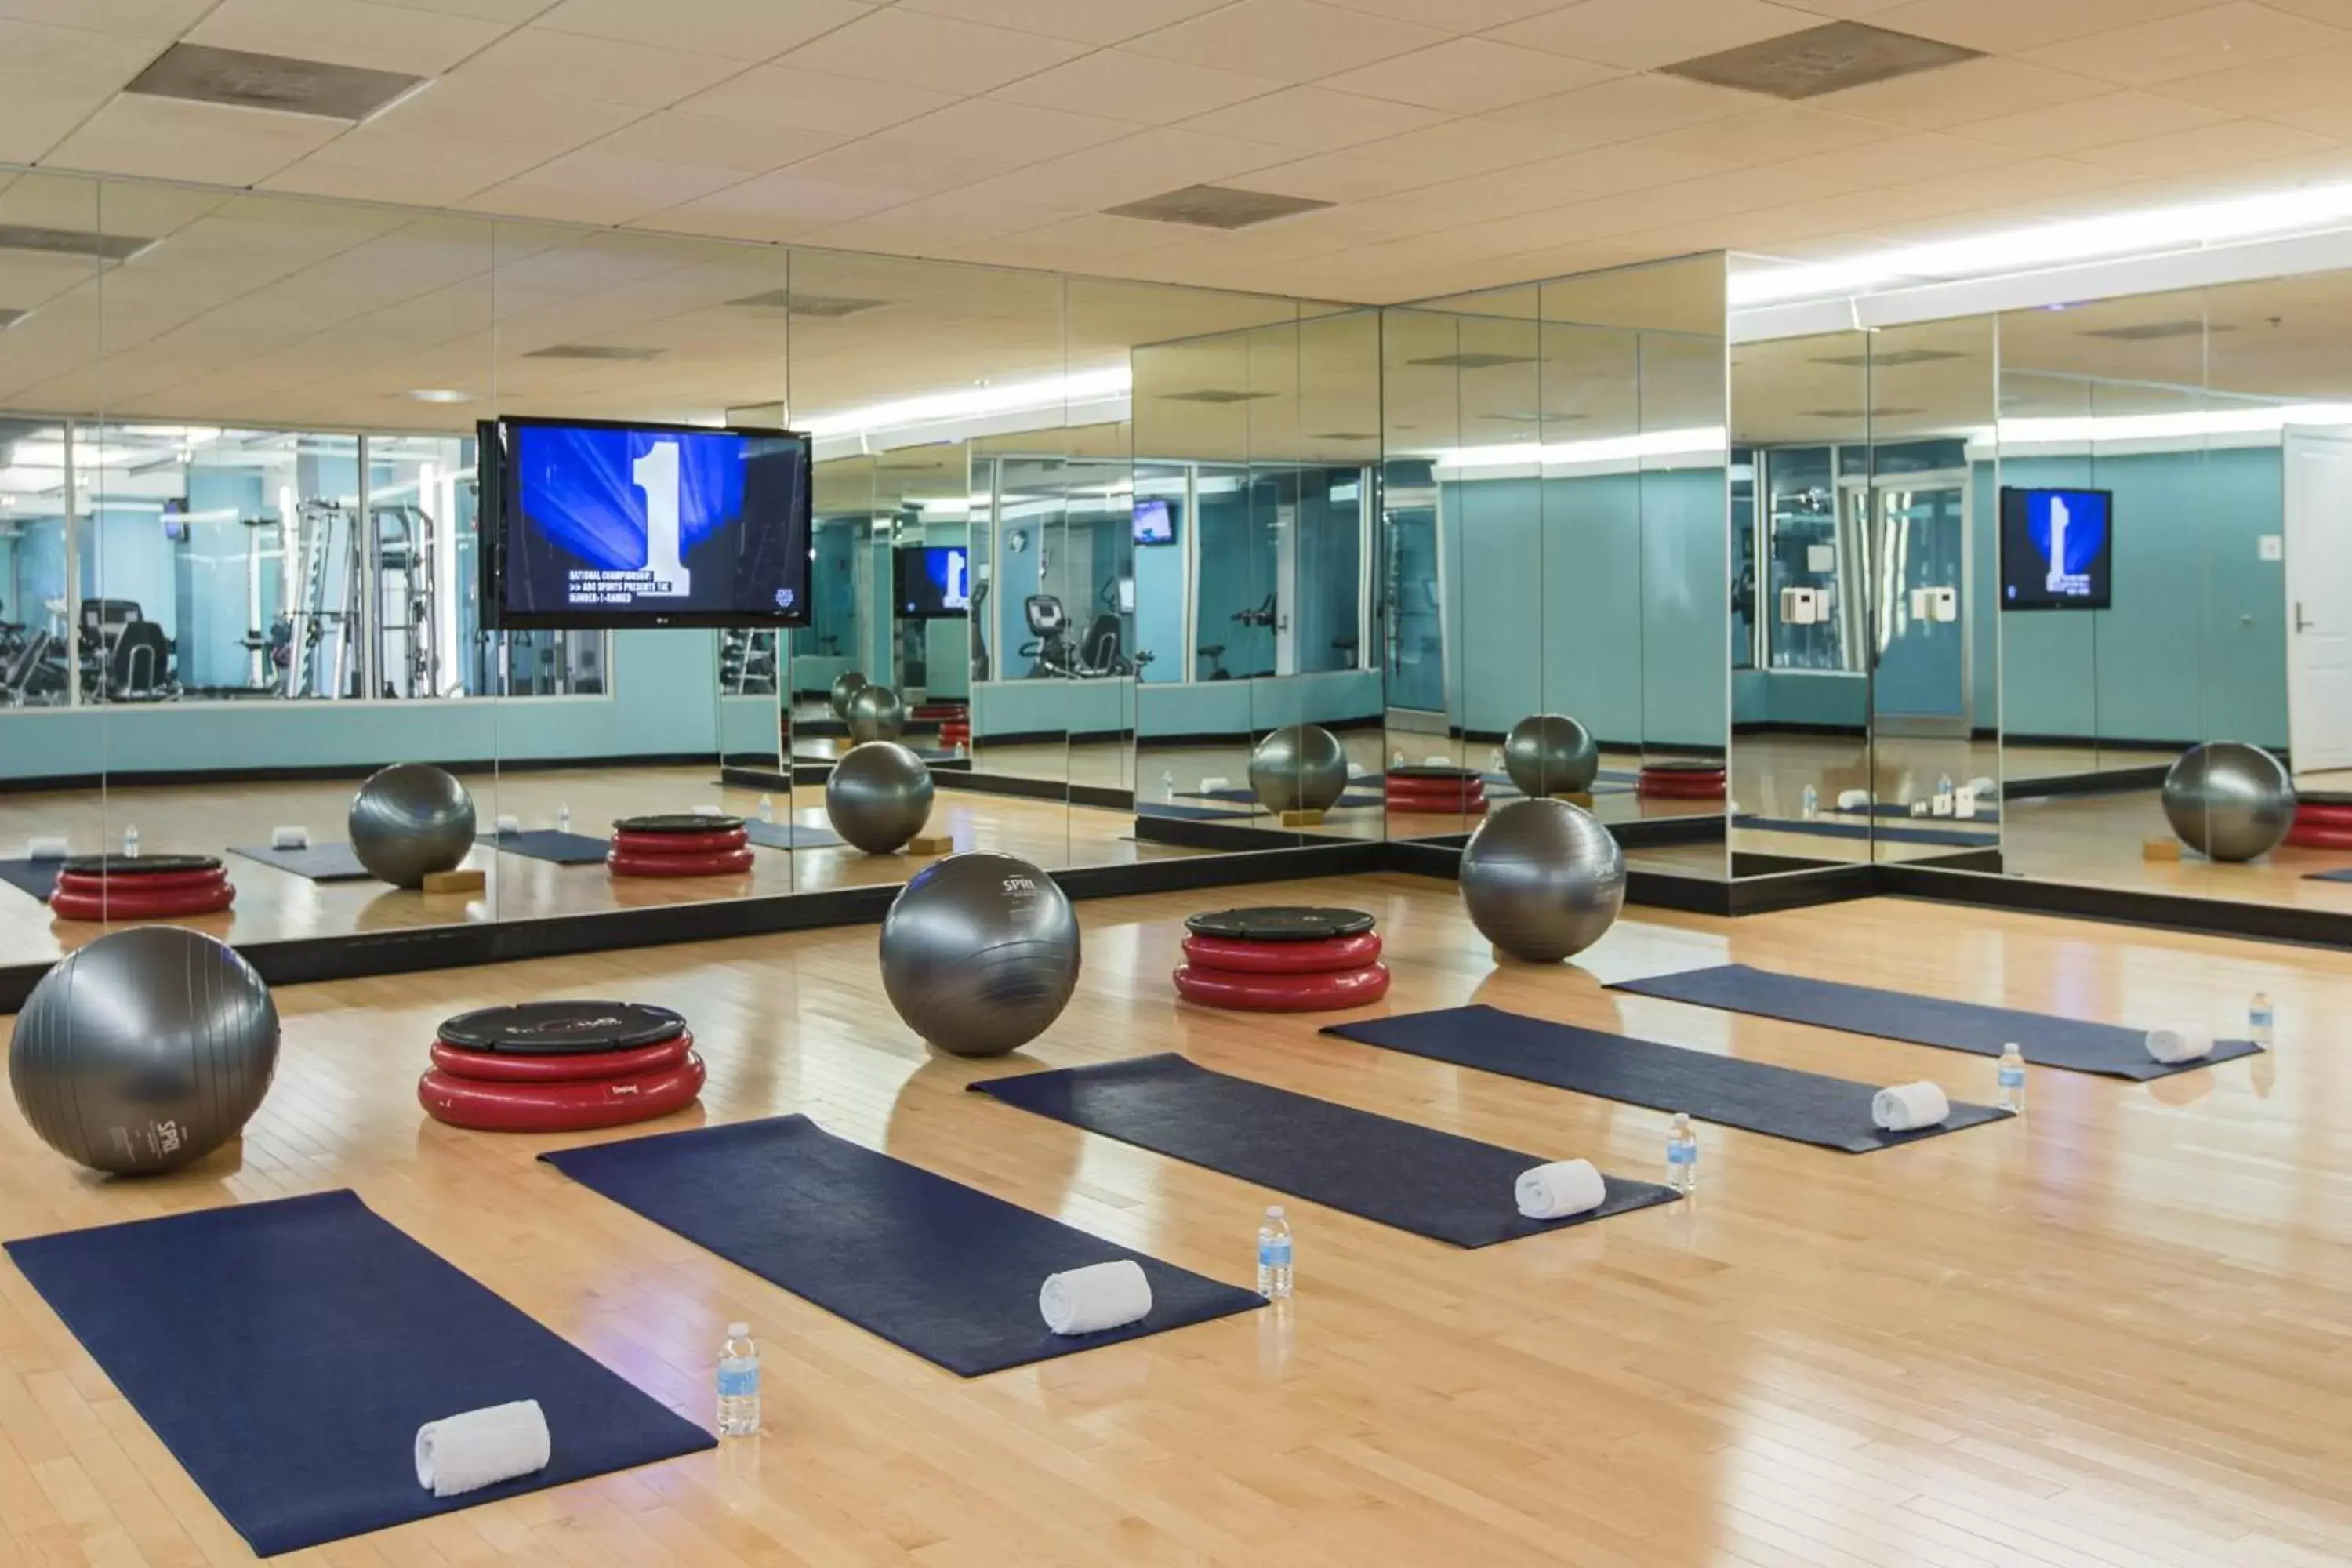 Fitness centre/facilities, Fitness Center/Facilities in JW Marriott Chicago